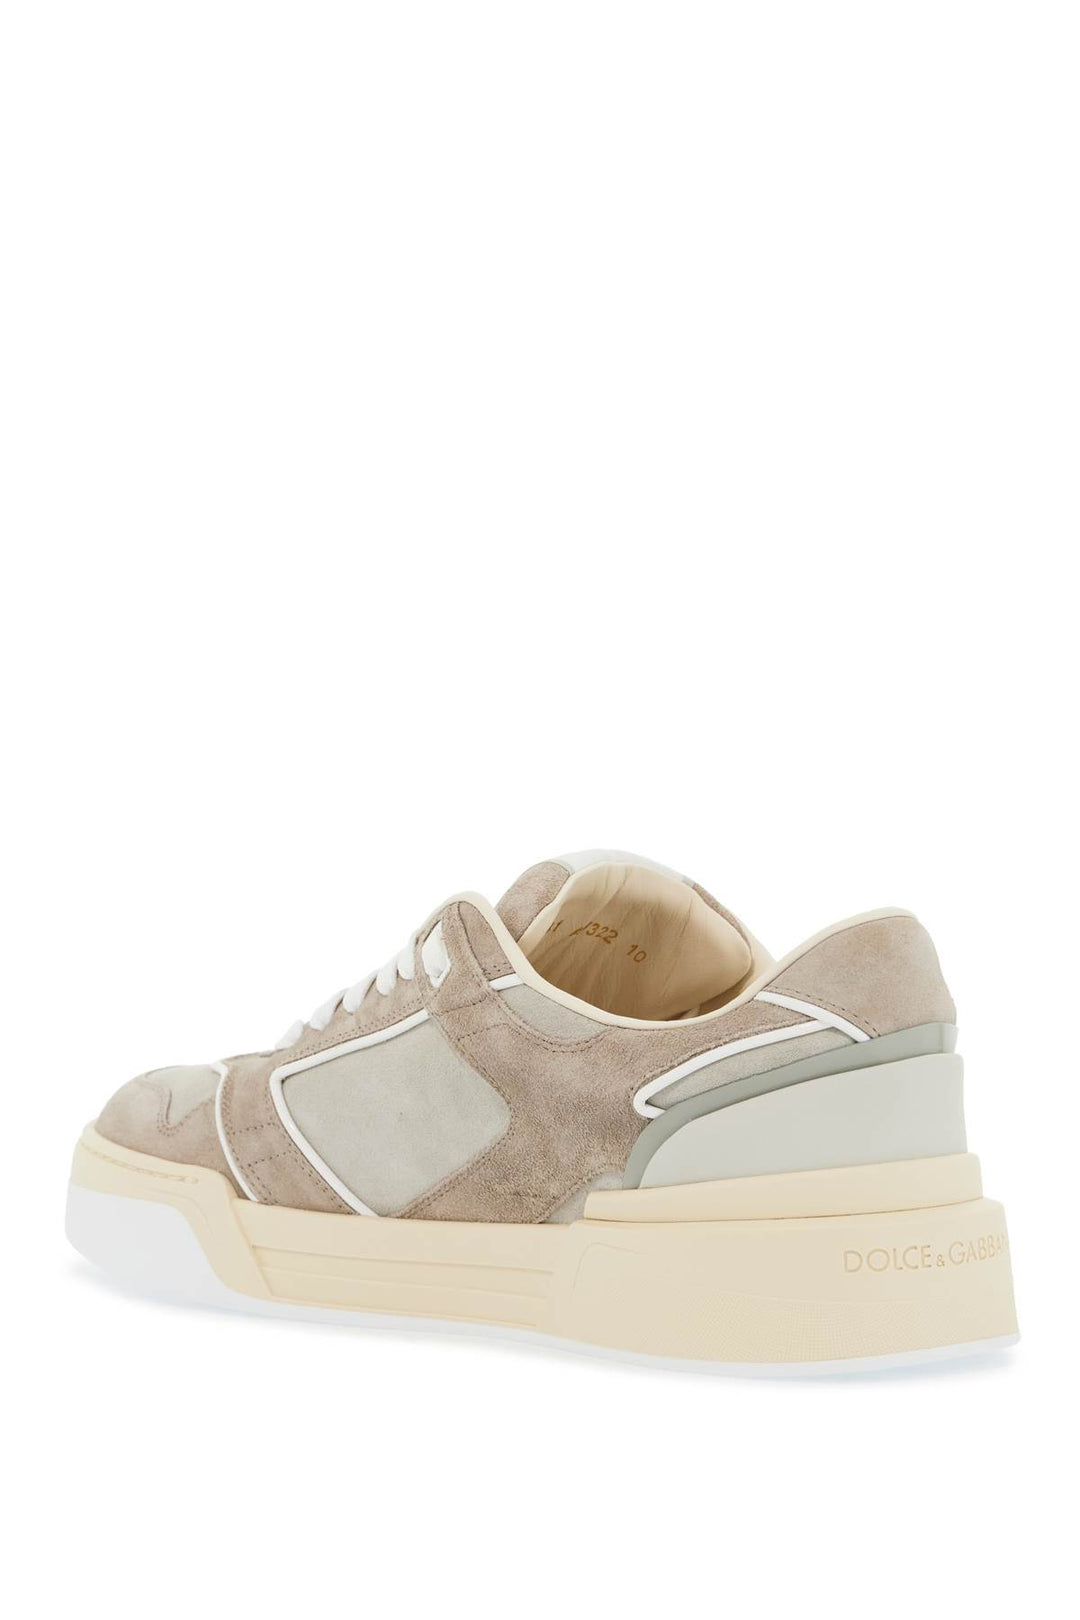 Dolce & Gabbana New Suede Roma Sneakers For Men And   Neutral